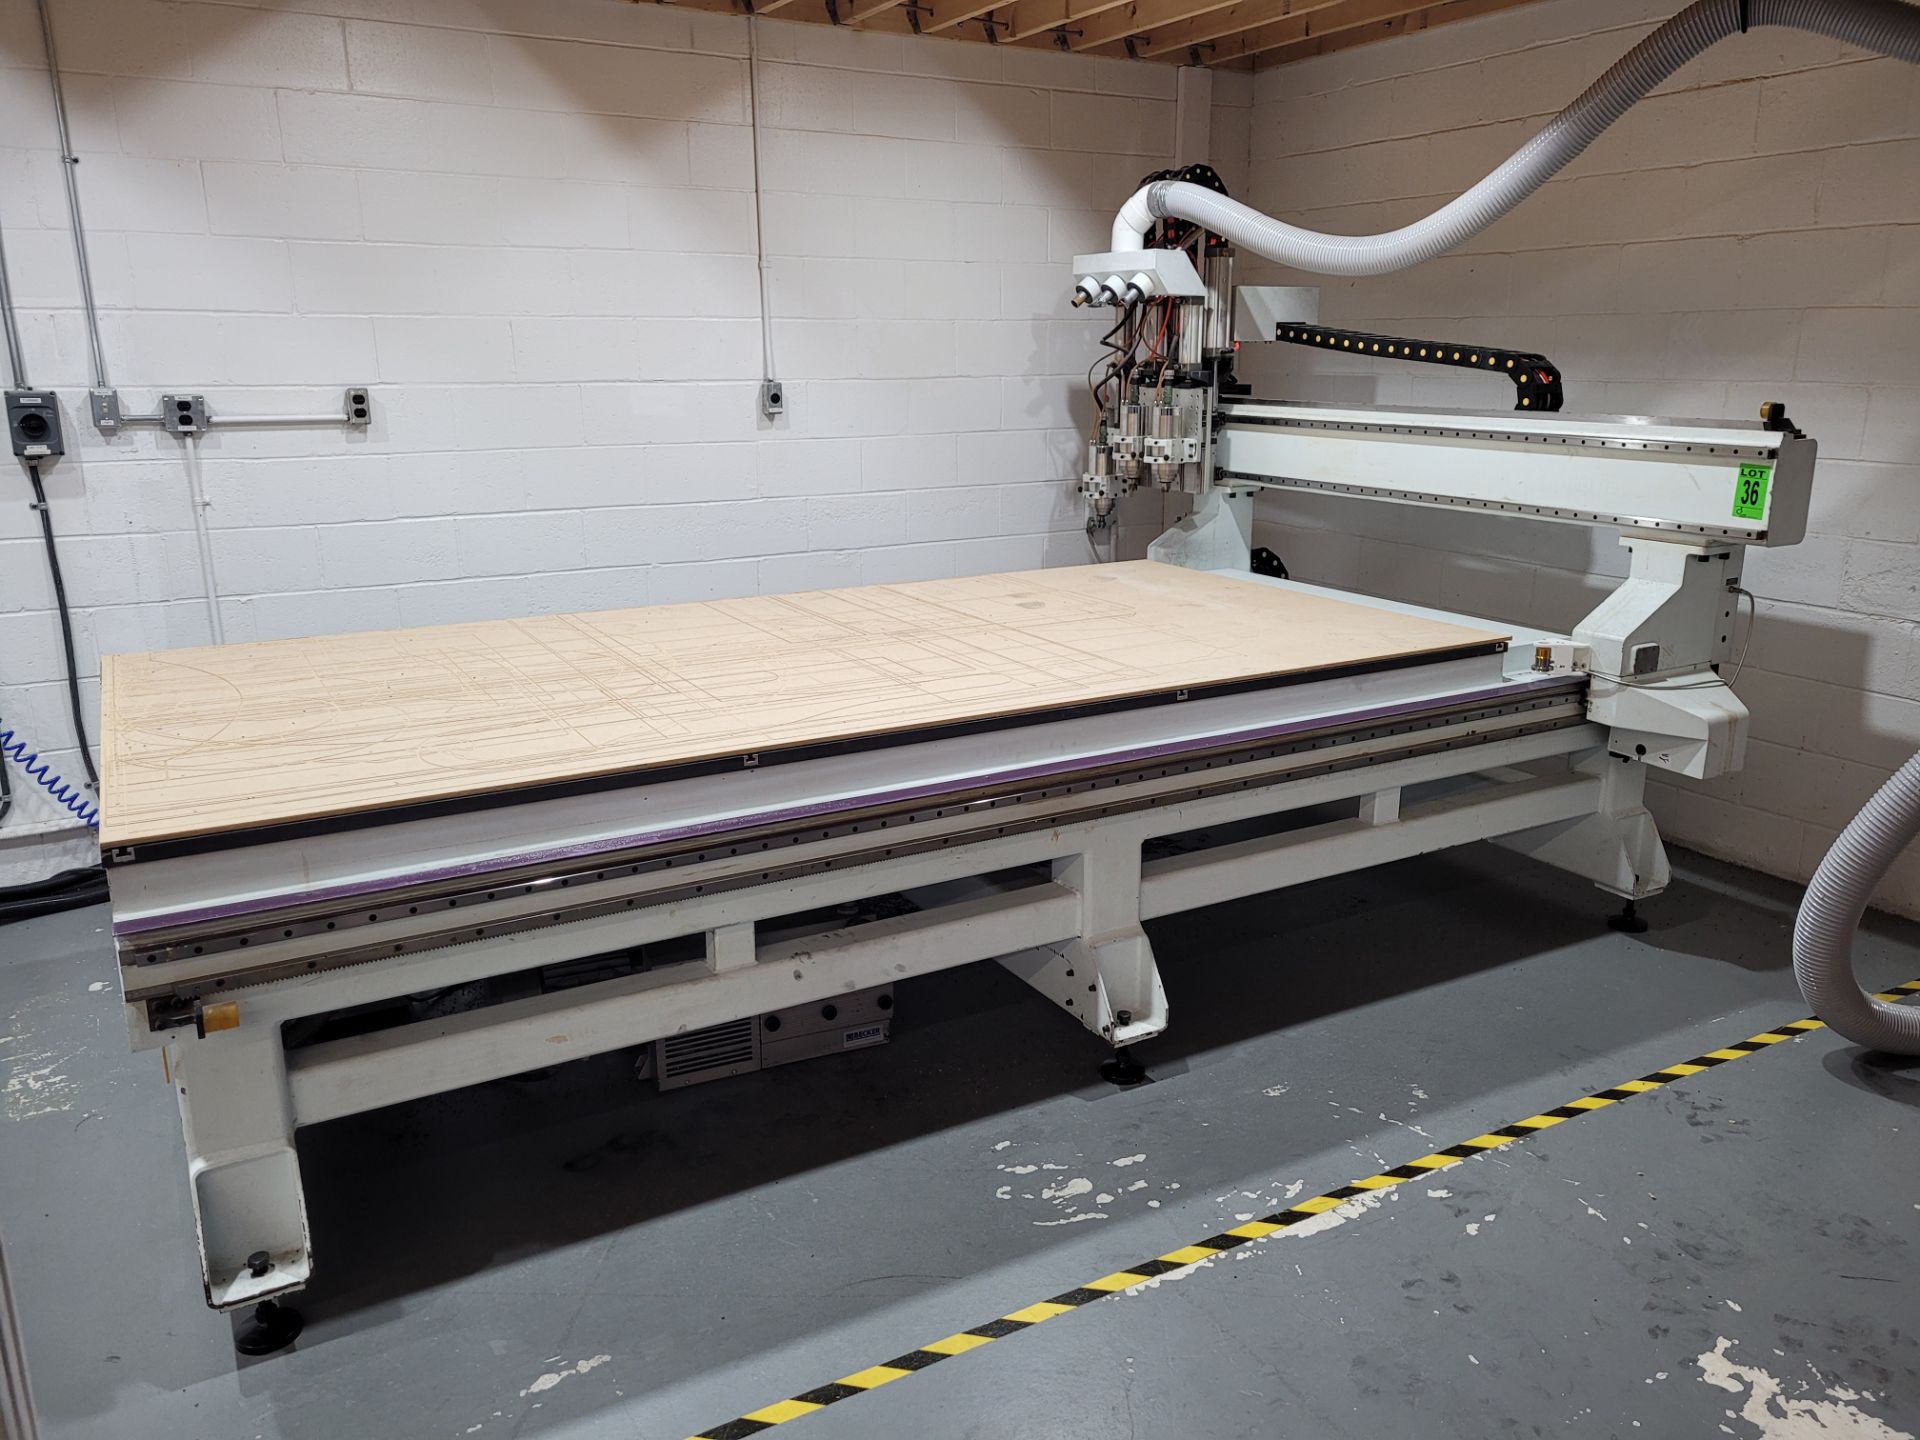 2015 SUDA ATC CNC Router mod. MG1630C, 3-Head System with Accessories and CRAFTEX mod. FM-300 Collec - Image 32 of 51